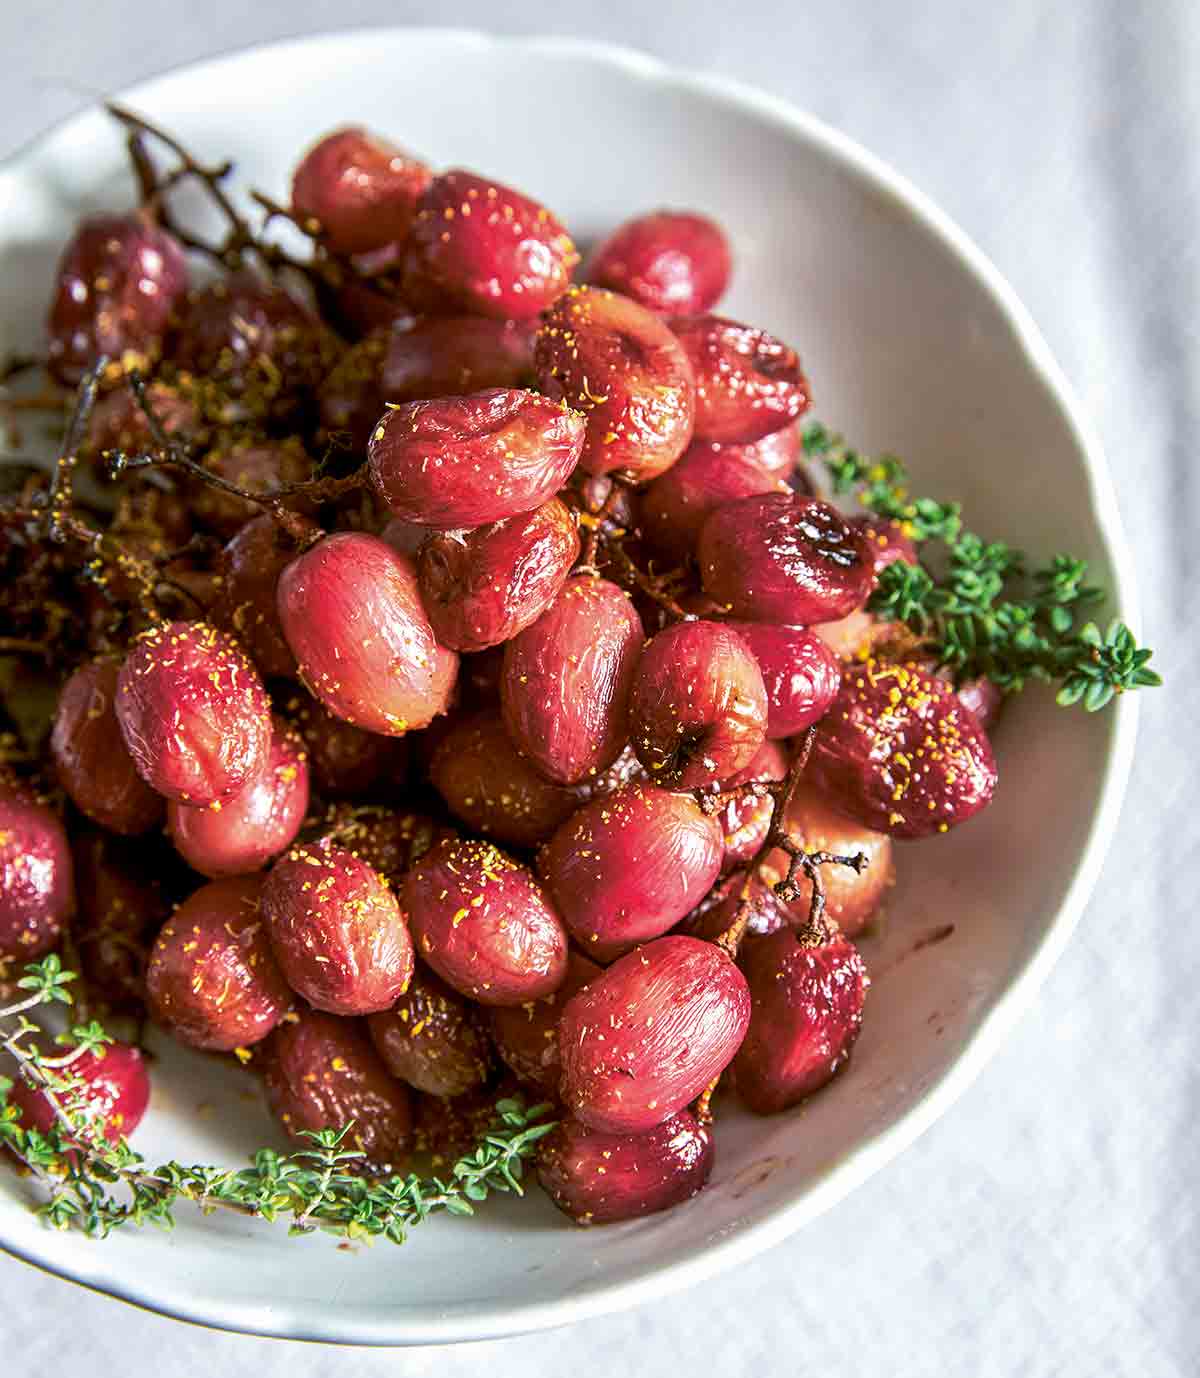 Several bunches of roasted grapes on the vine in a white bowl.